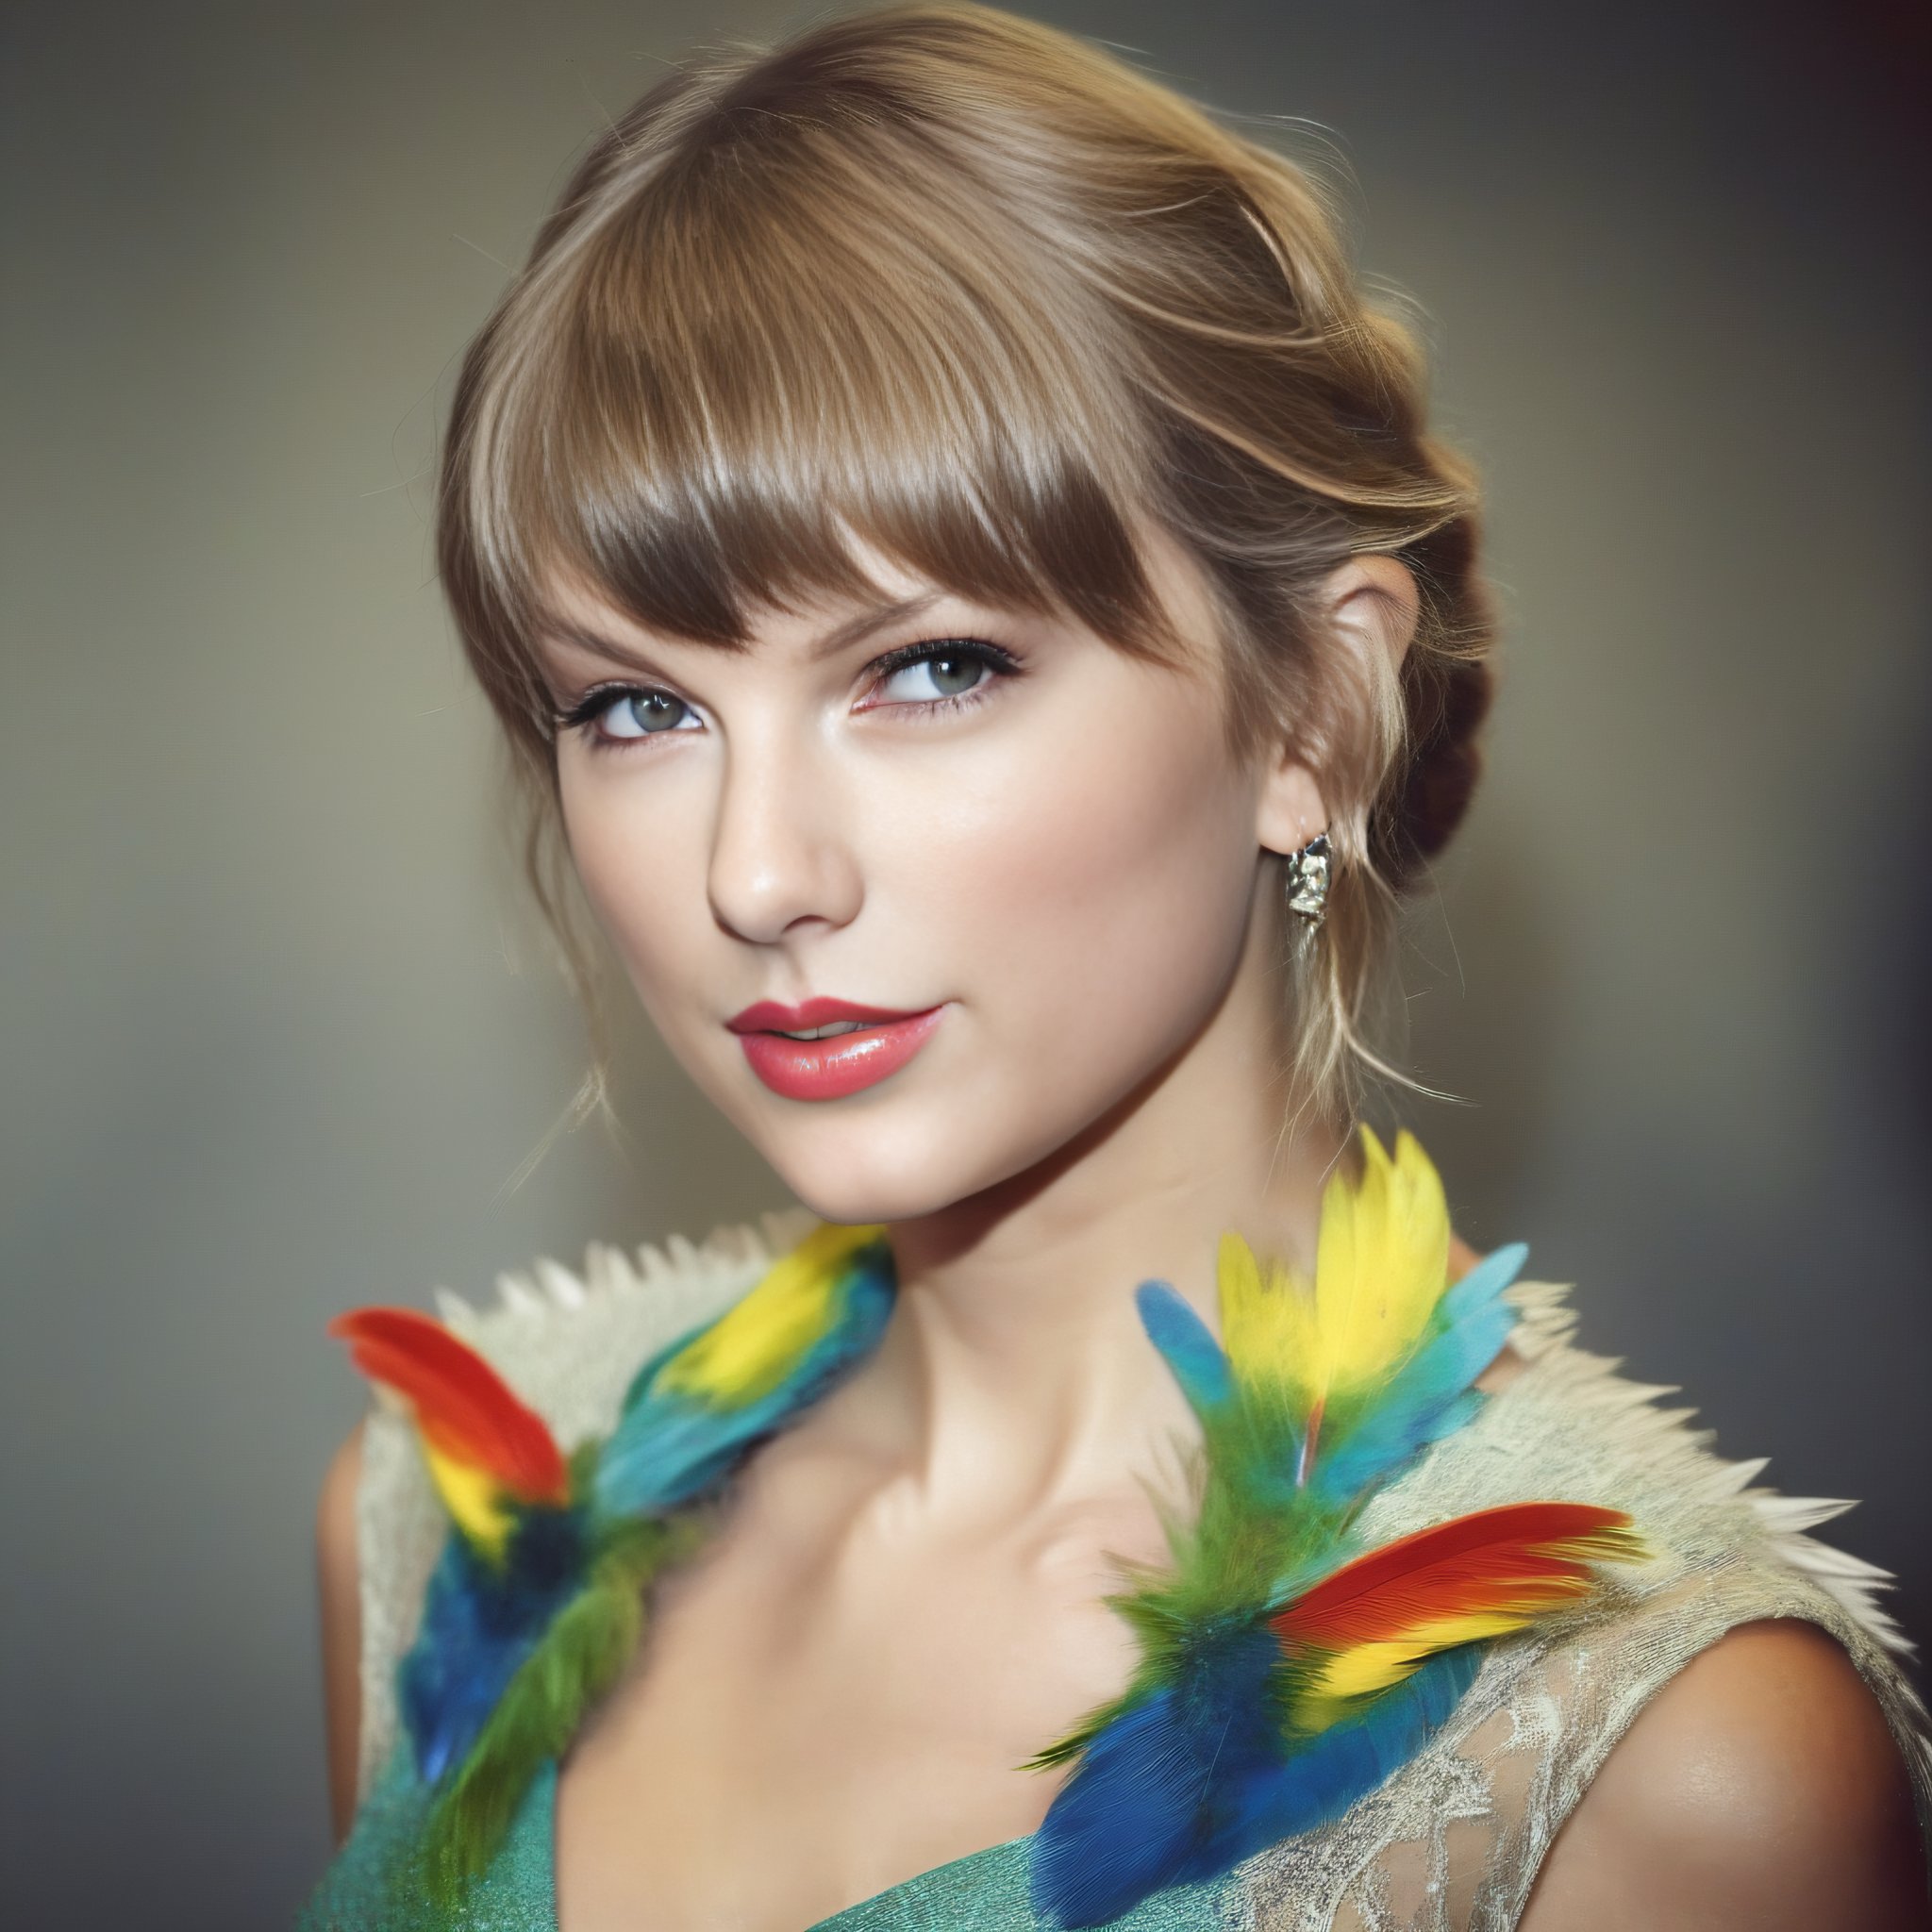 TaylorSwift, photograph, Unexpected [1960'S|Natural] large Girl, wearing Parrot-style Chausses, Artistic Short and spiky hairstyle, tilt shift, film grain, Canon RF, 35mm, Desaturated, Elegant,  <lora:TaylorSwiftSDXL:1>